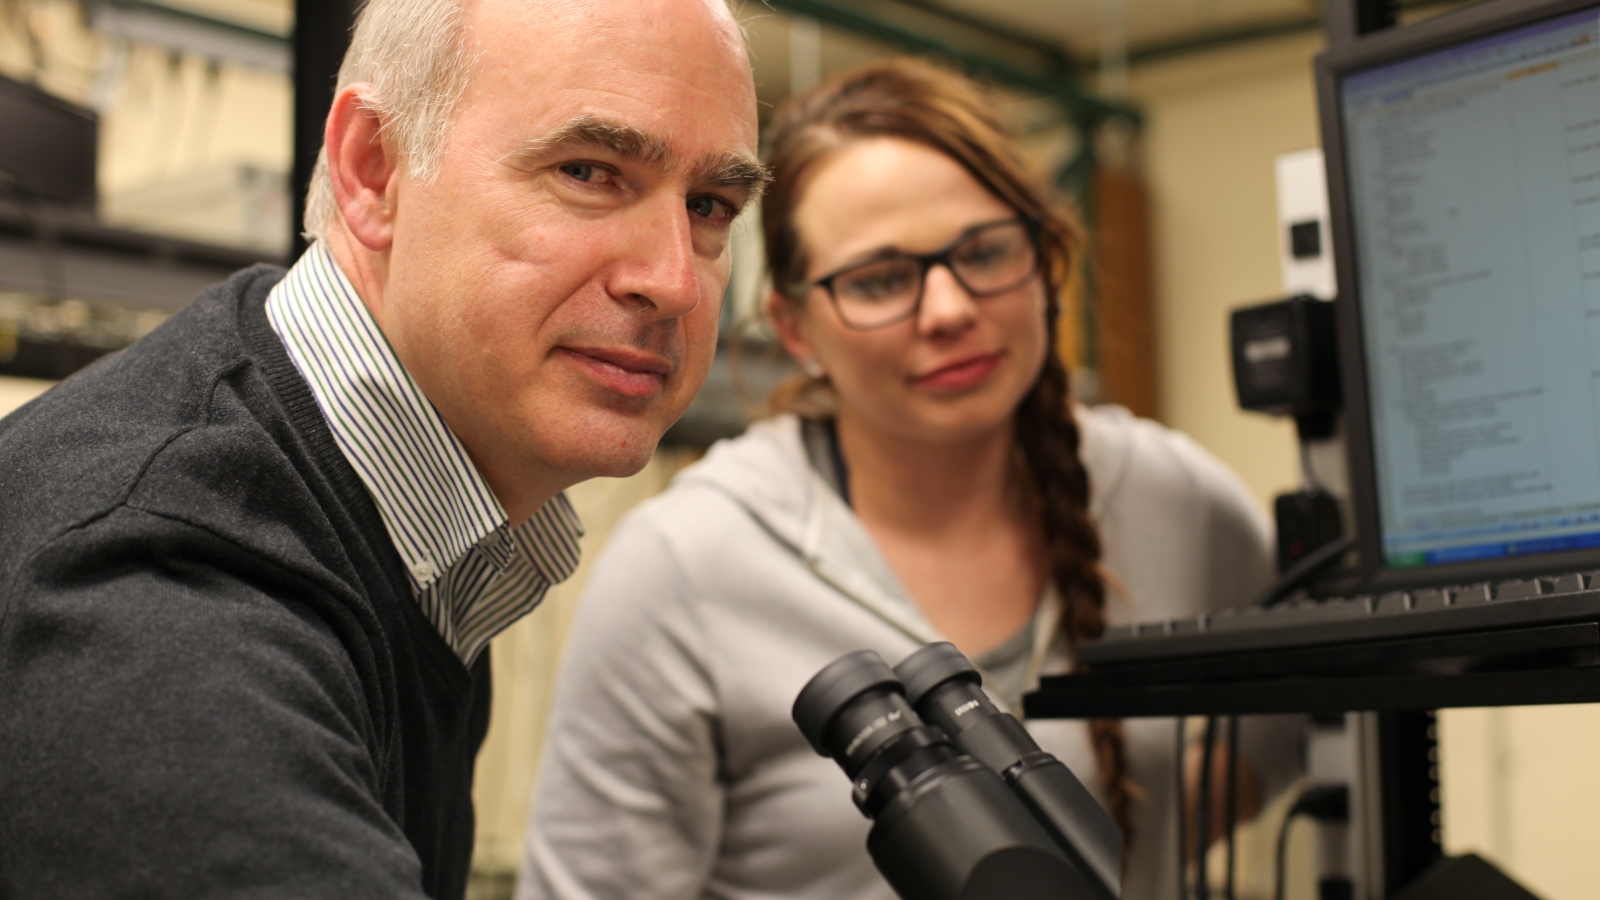 Steve Smith, professor and director of Nanoscience and Nanoengineering at the SD Mines, works with student Laura Brunmaier.